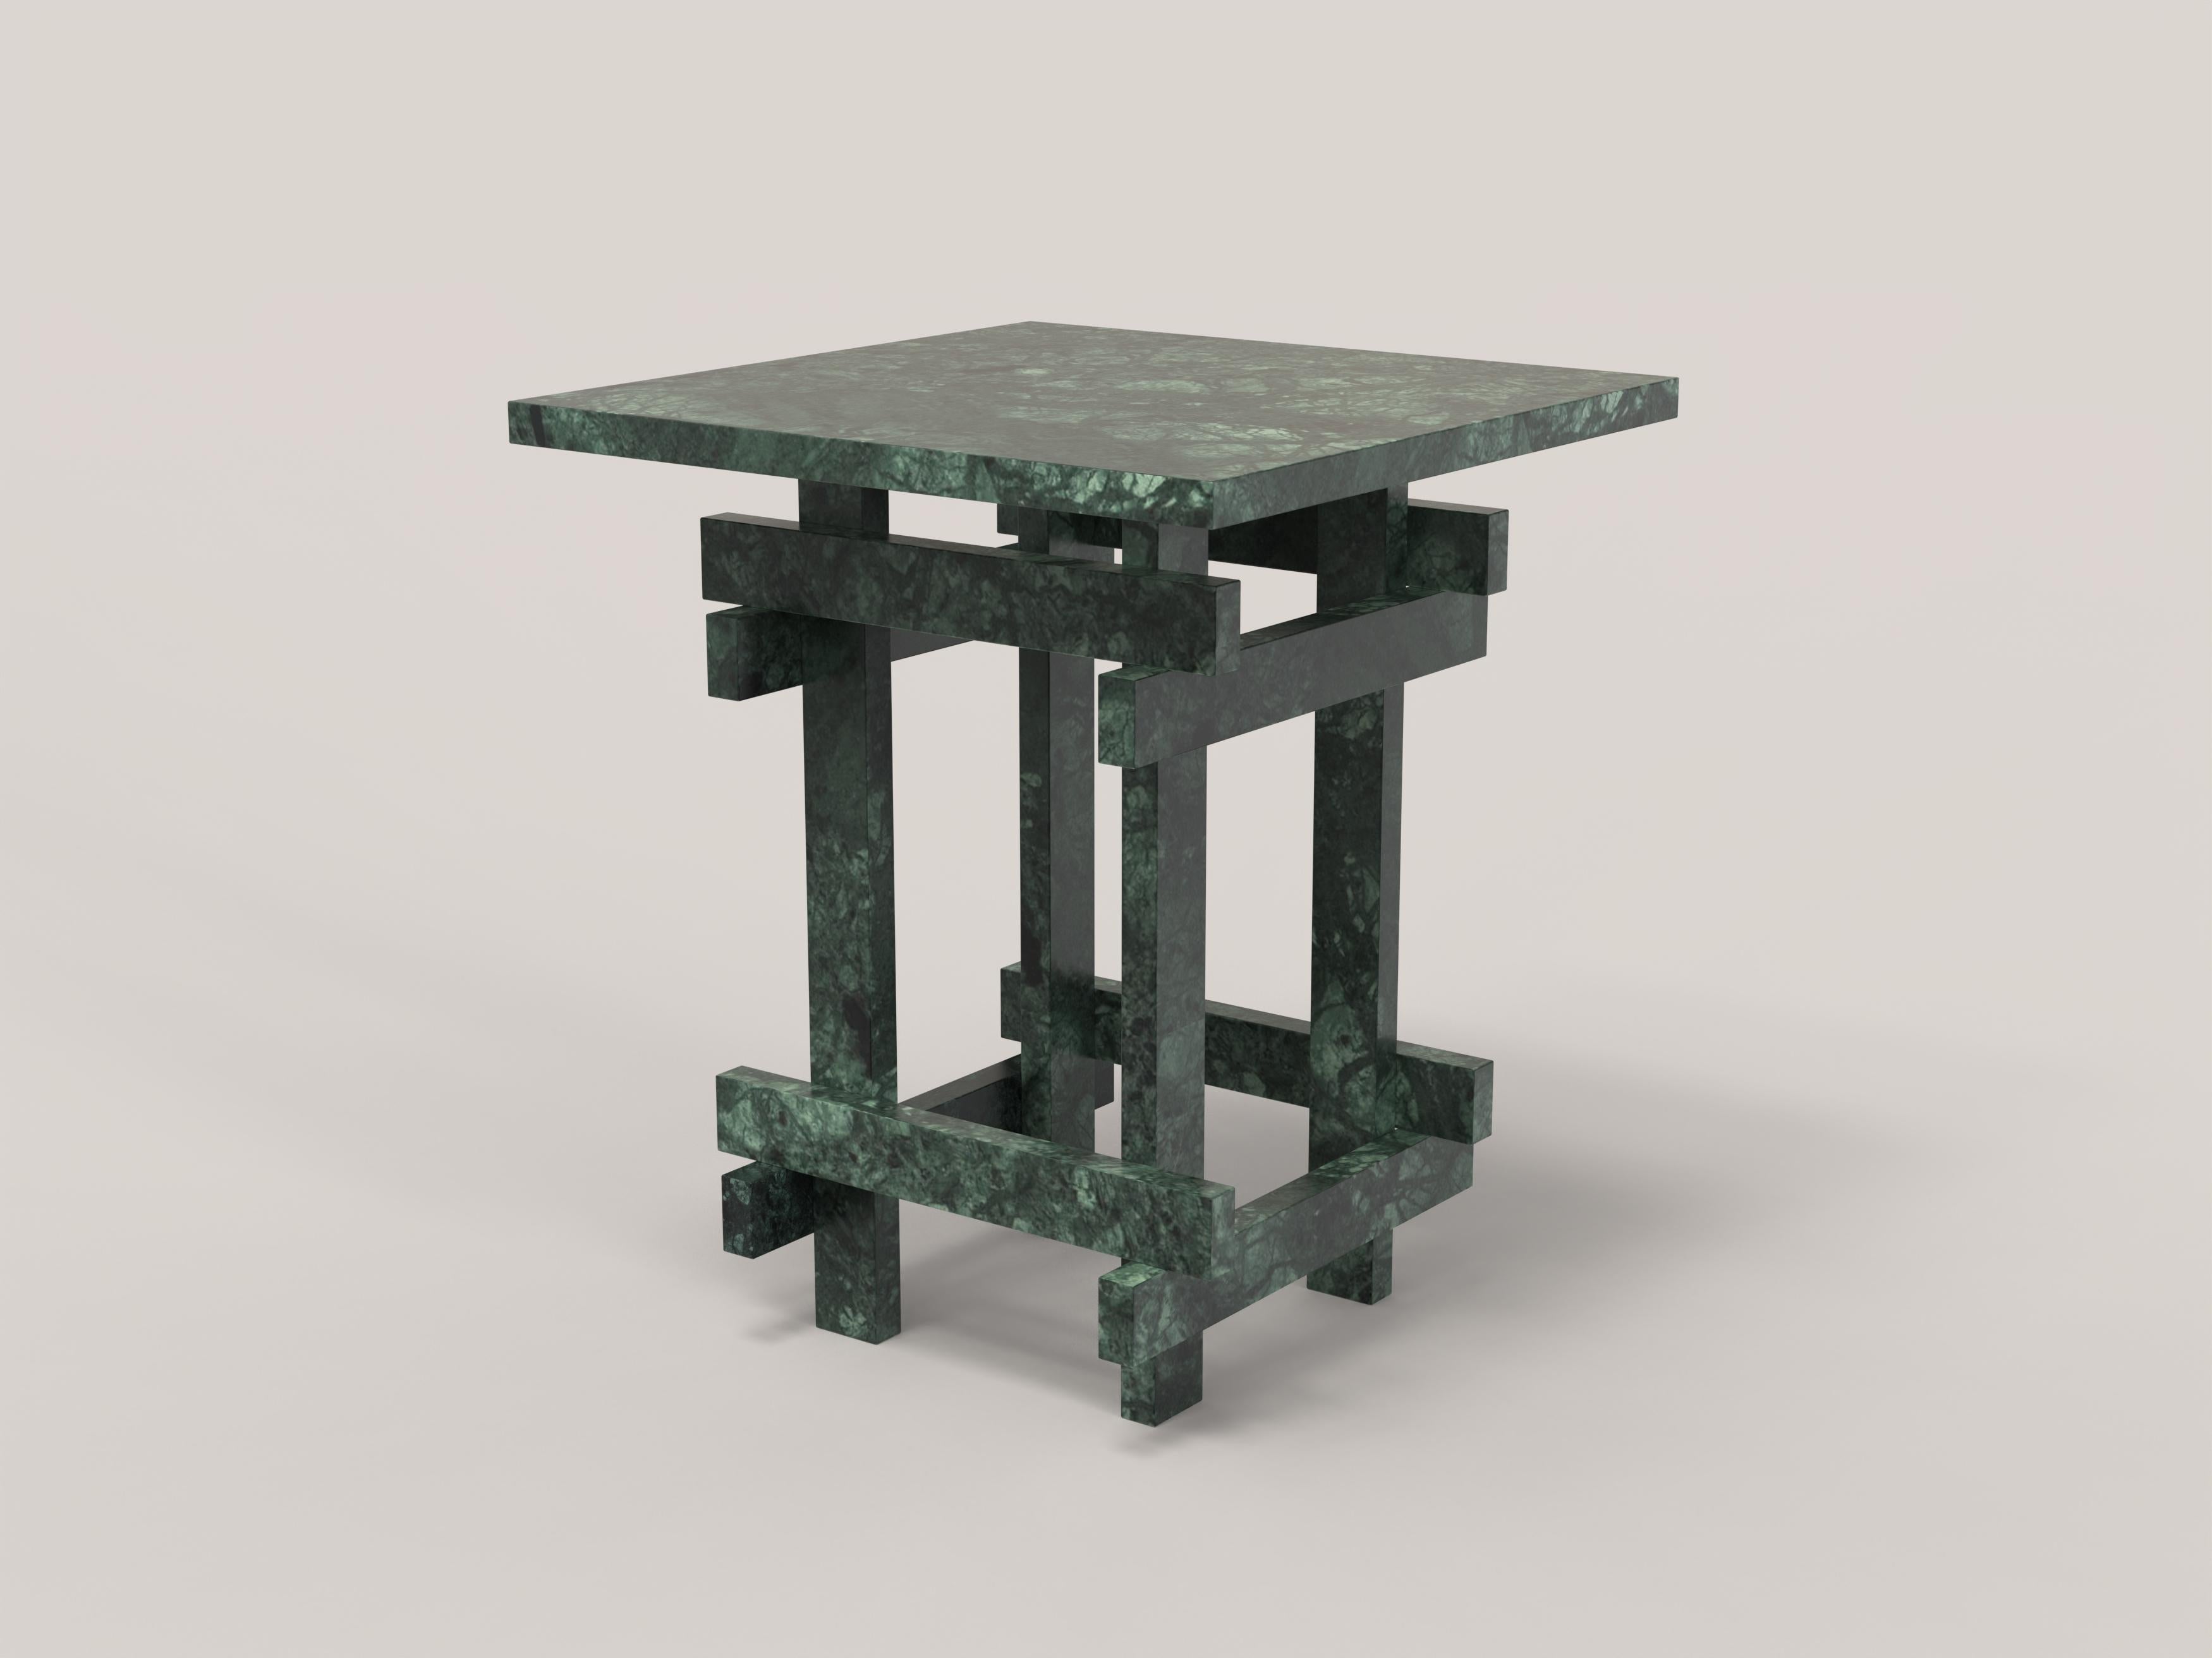 Contemporary LimitedEdition Green Marble Table, Paranoid V1 by Edizione Limitata For Sale 3